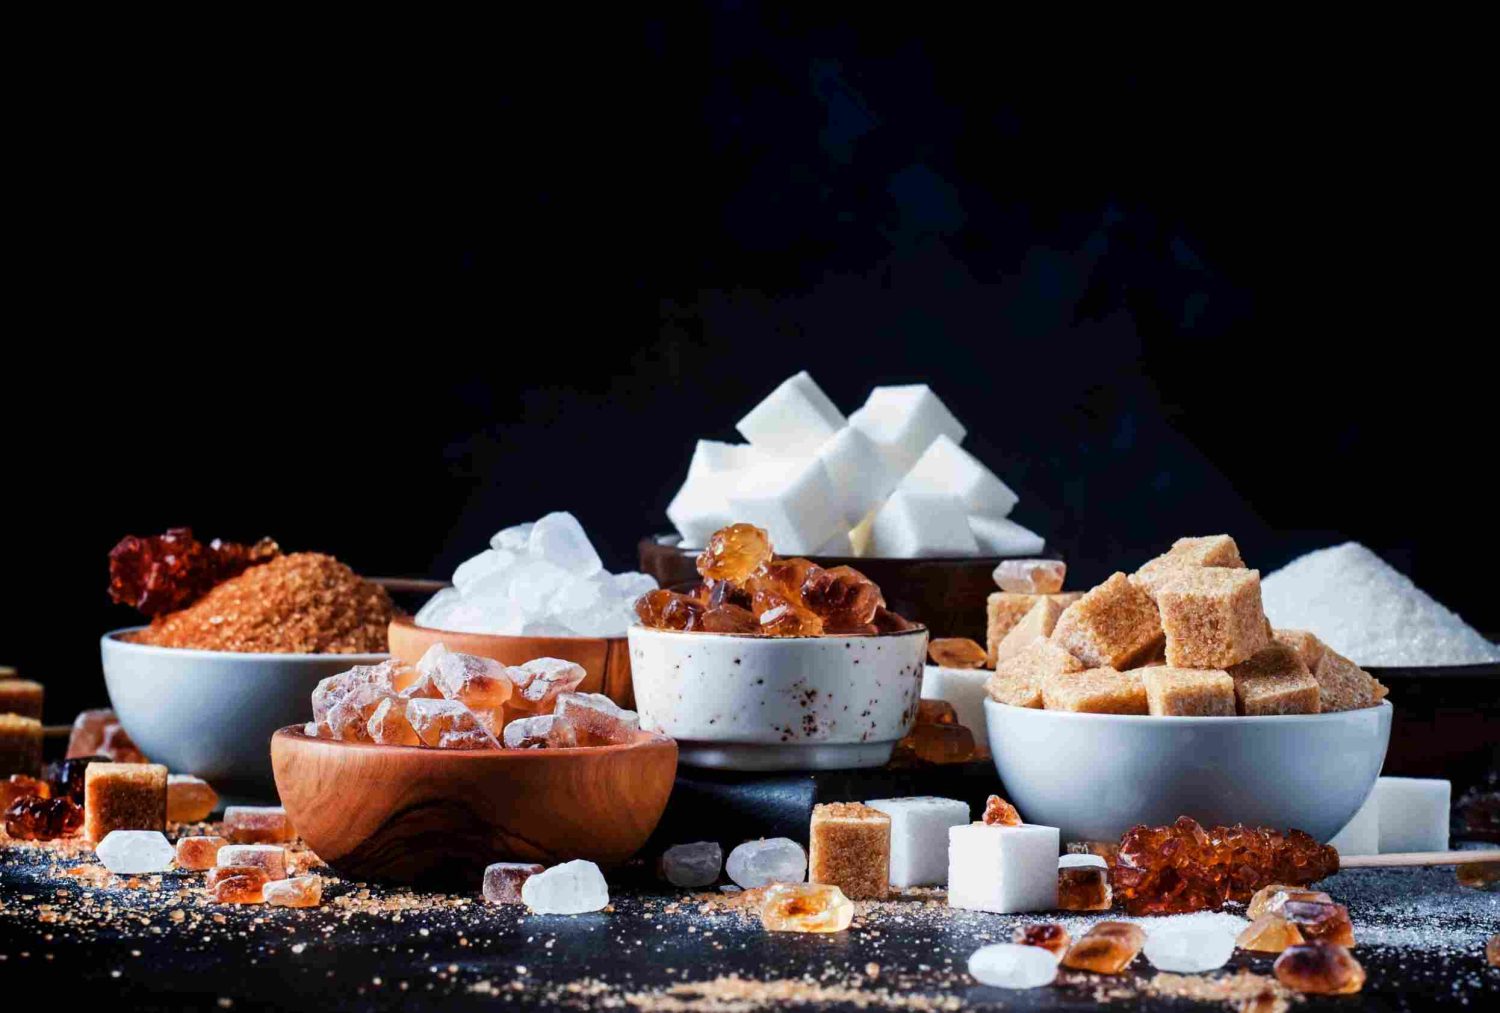 An assortment of different types of organic sugar in bowls on a table with a dark background